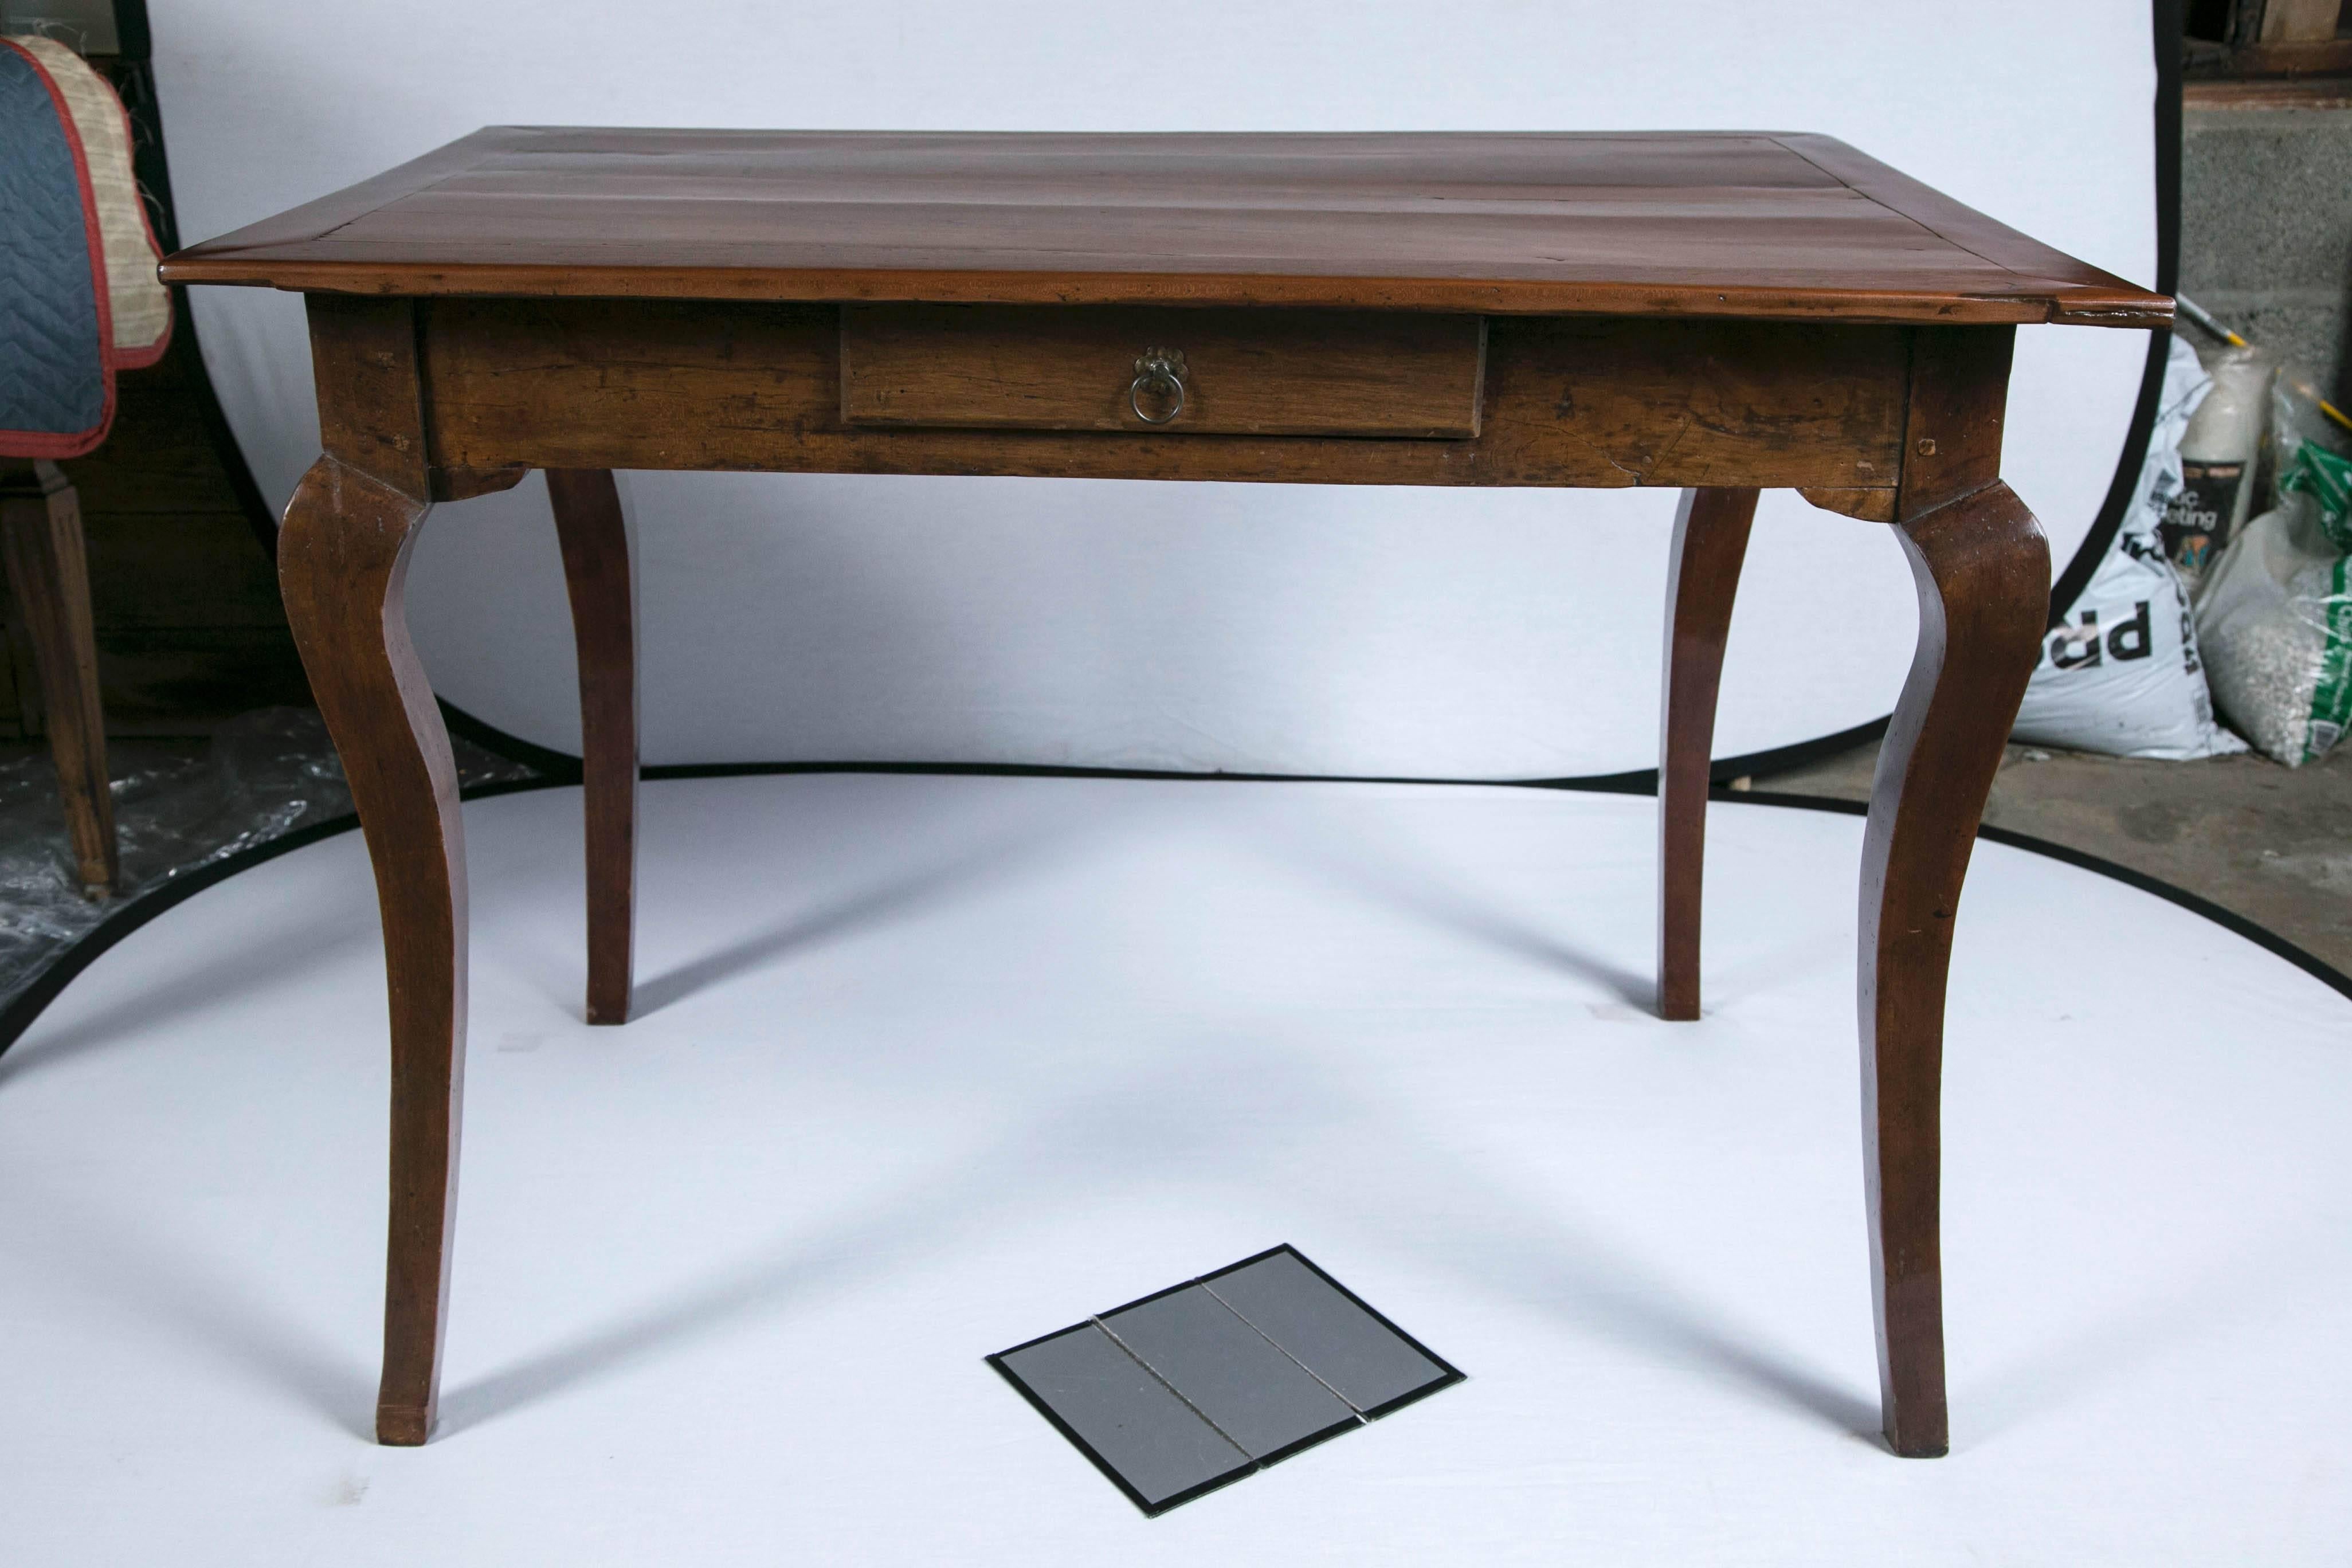 Walnut writing table, 19th century, France. Beautiful aged walnut patina. Curved and tapered cabriole legs. Single drawer with original escutcheon.